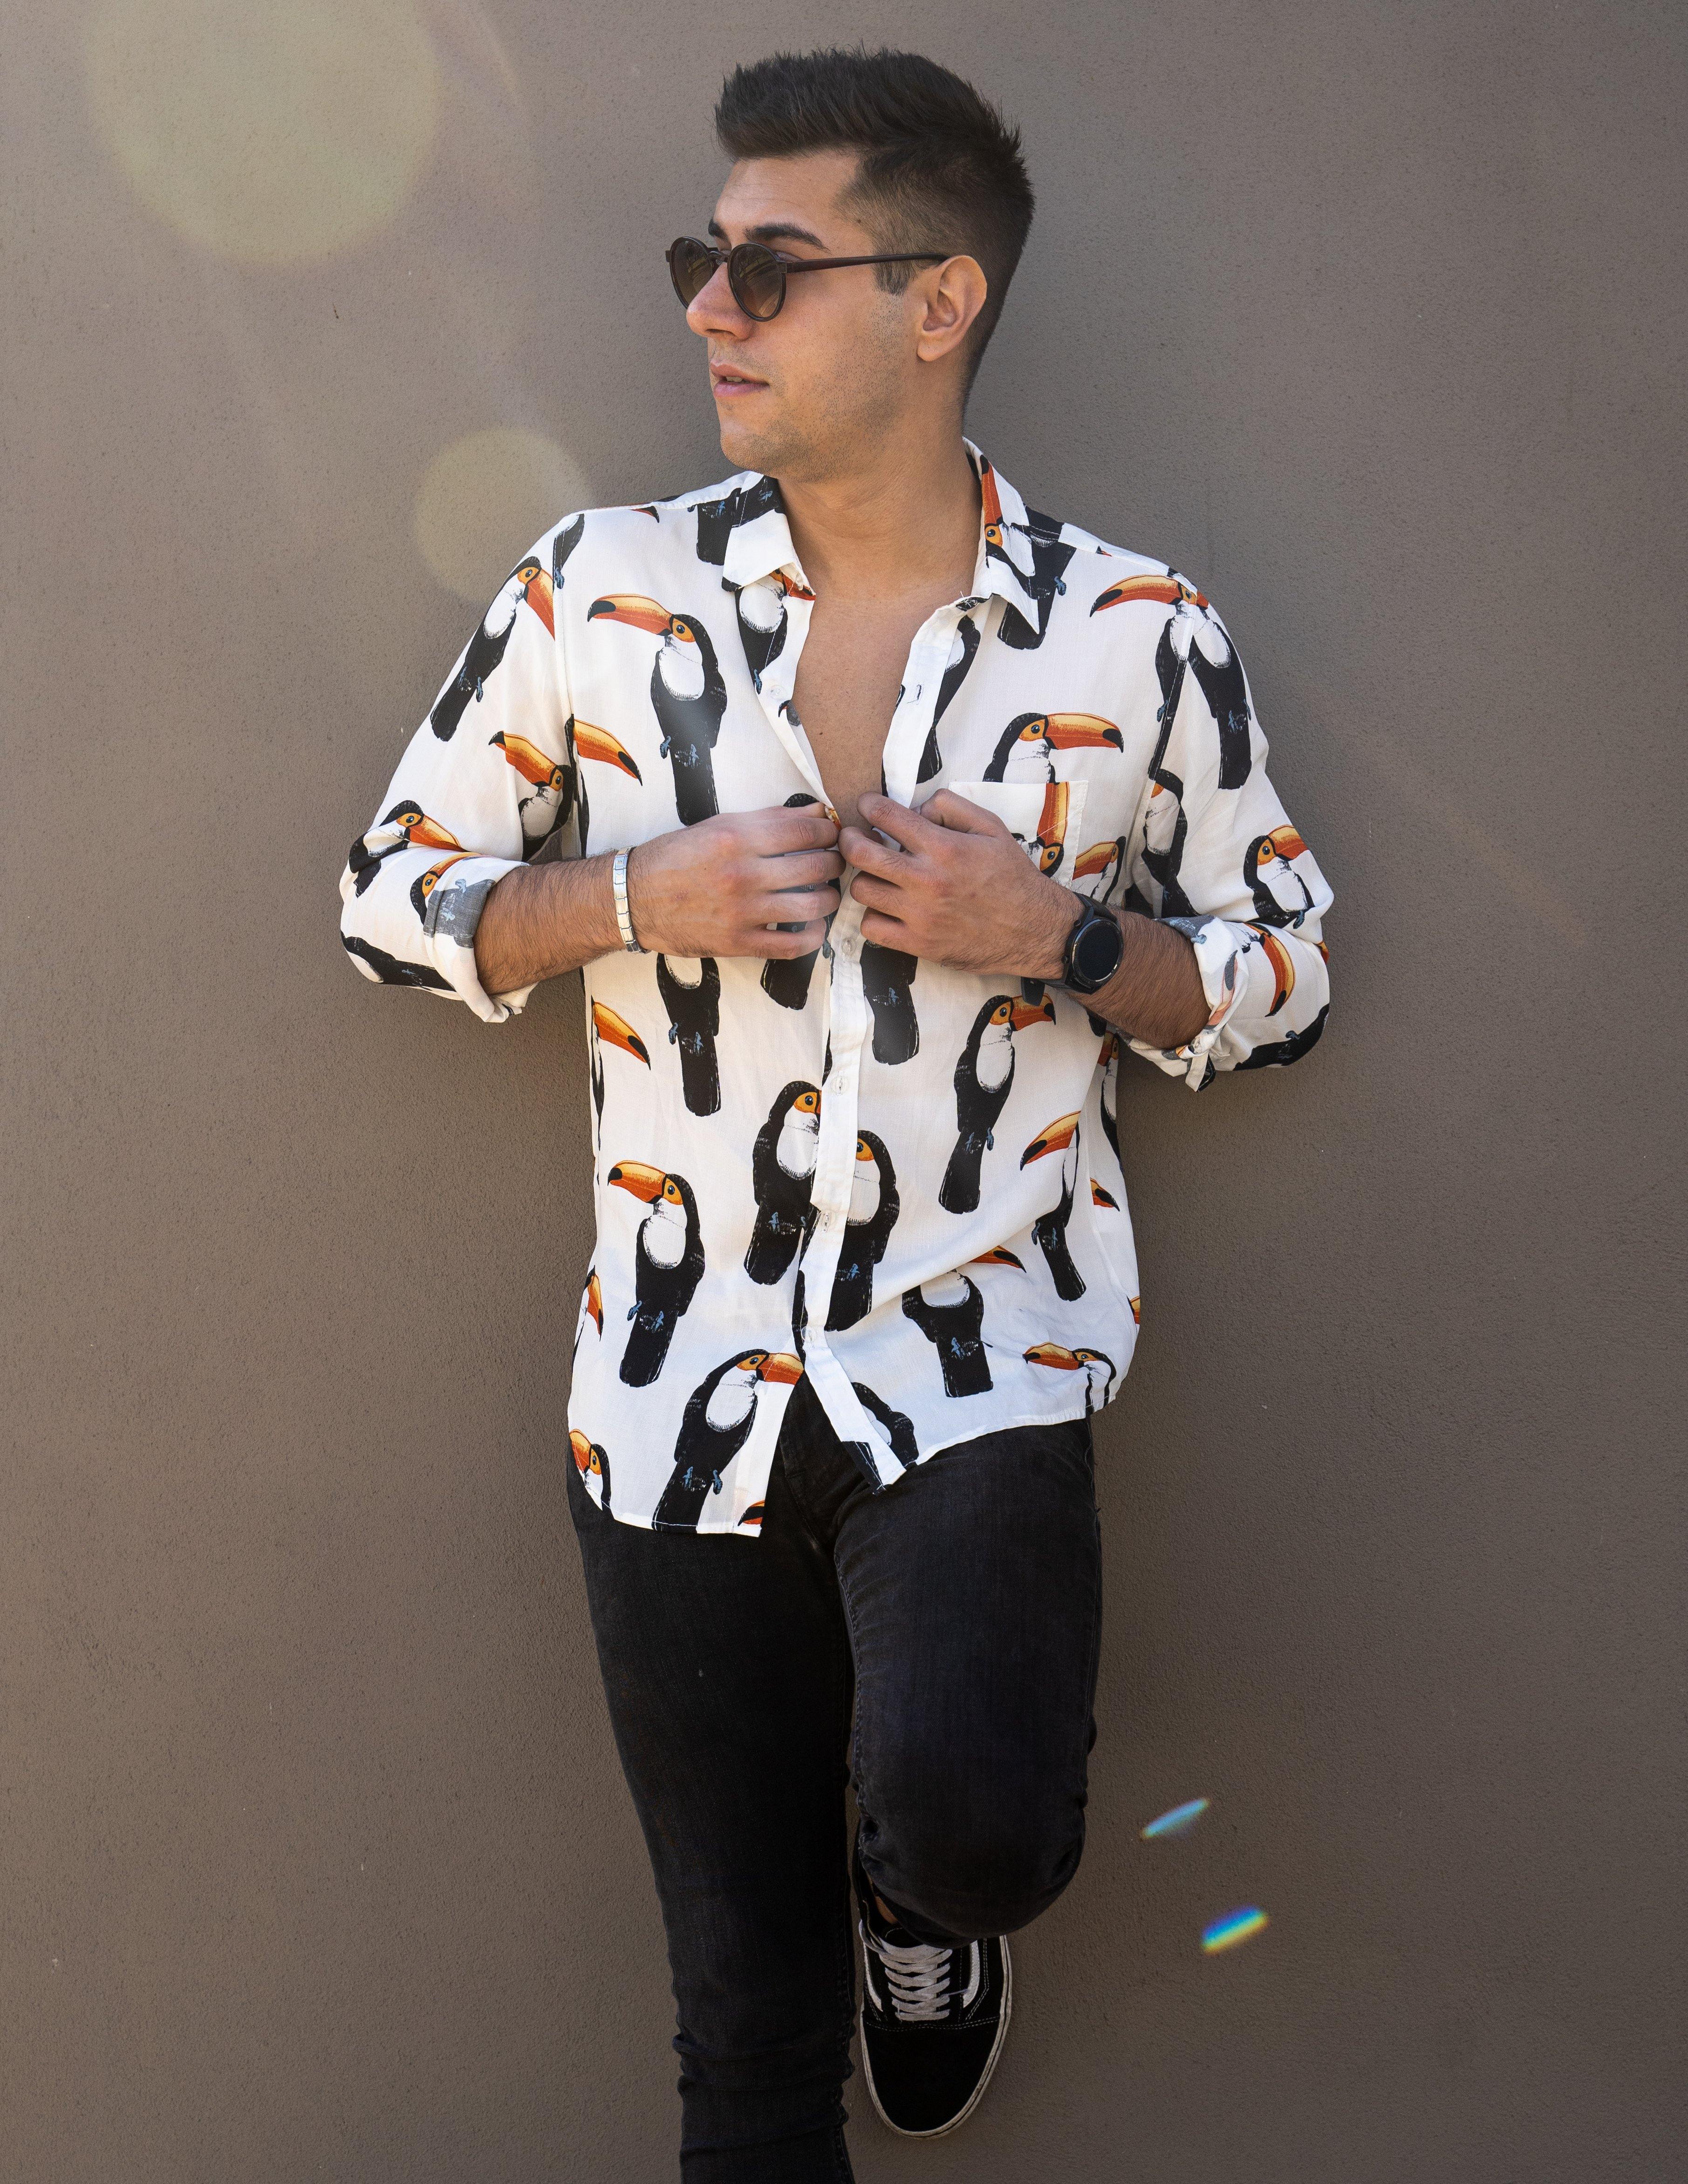 Long Sleeve Shirt - ToucanStrange ParadiseStrange Paradise
Men's Long Sleeve Shirt - Toucan Do It is a slim fit shirt with button up fastening and a single chest pocket. The shirt showcases a smart casual look and is pairedMen's Long Sleeve Shirt - Toucan Do It